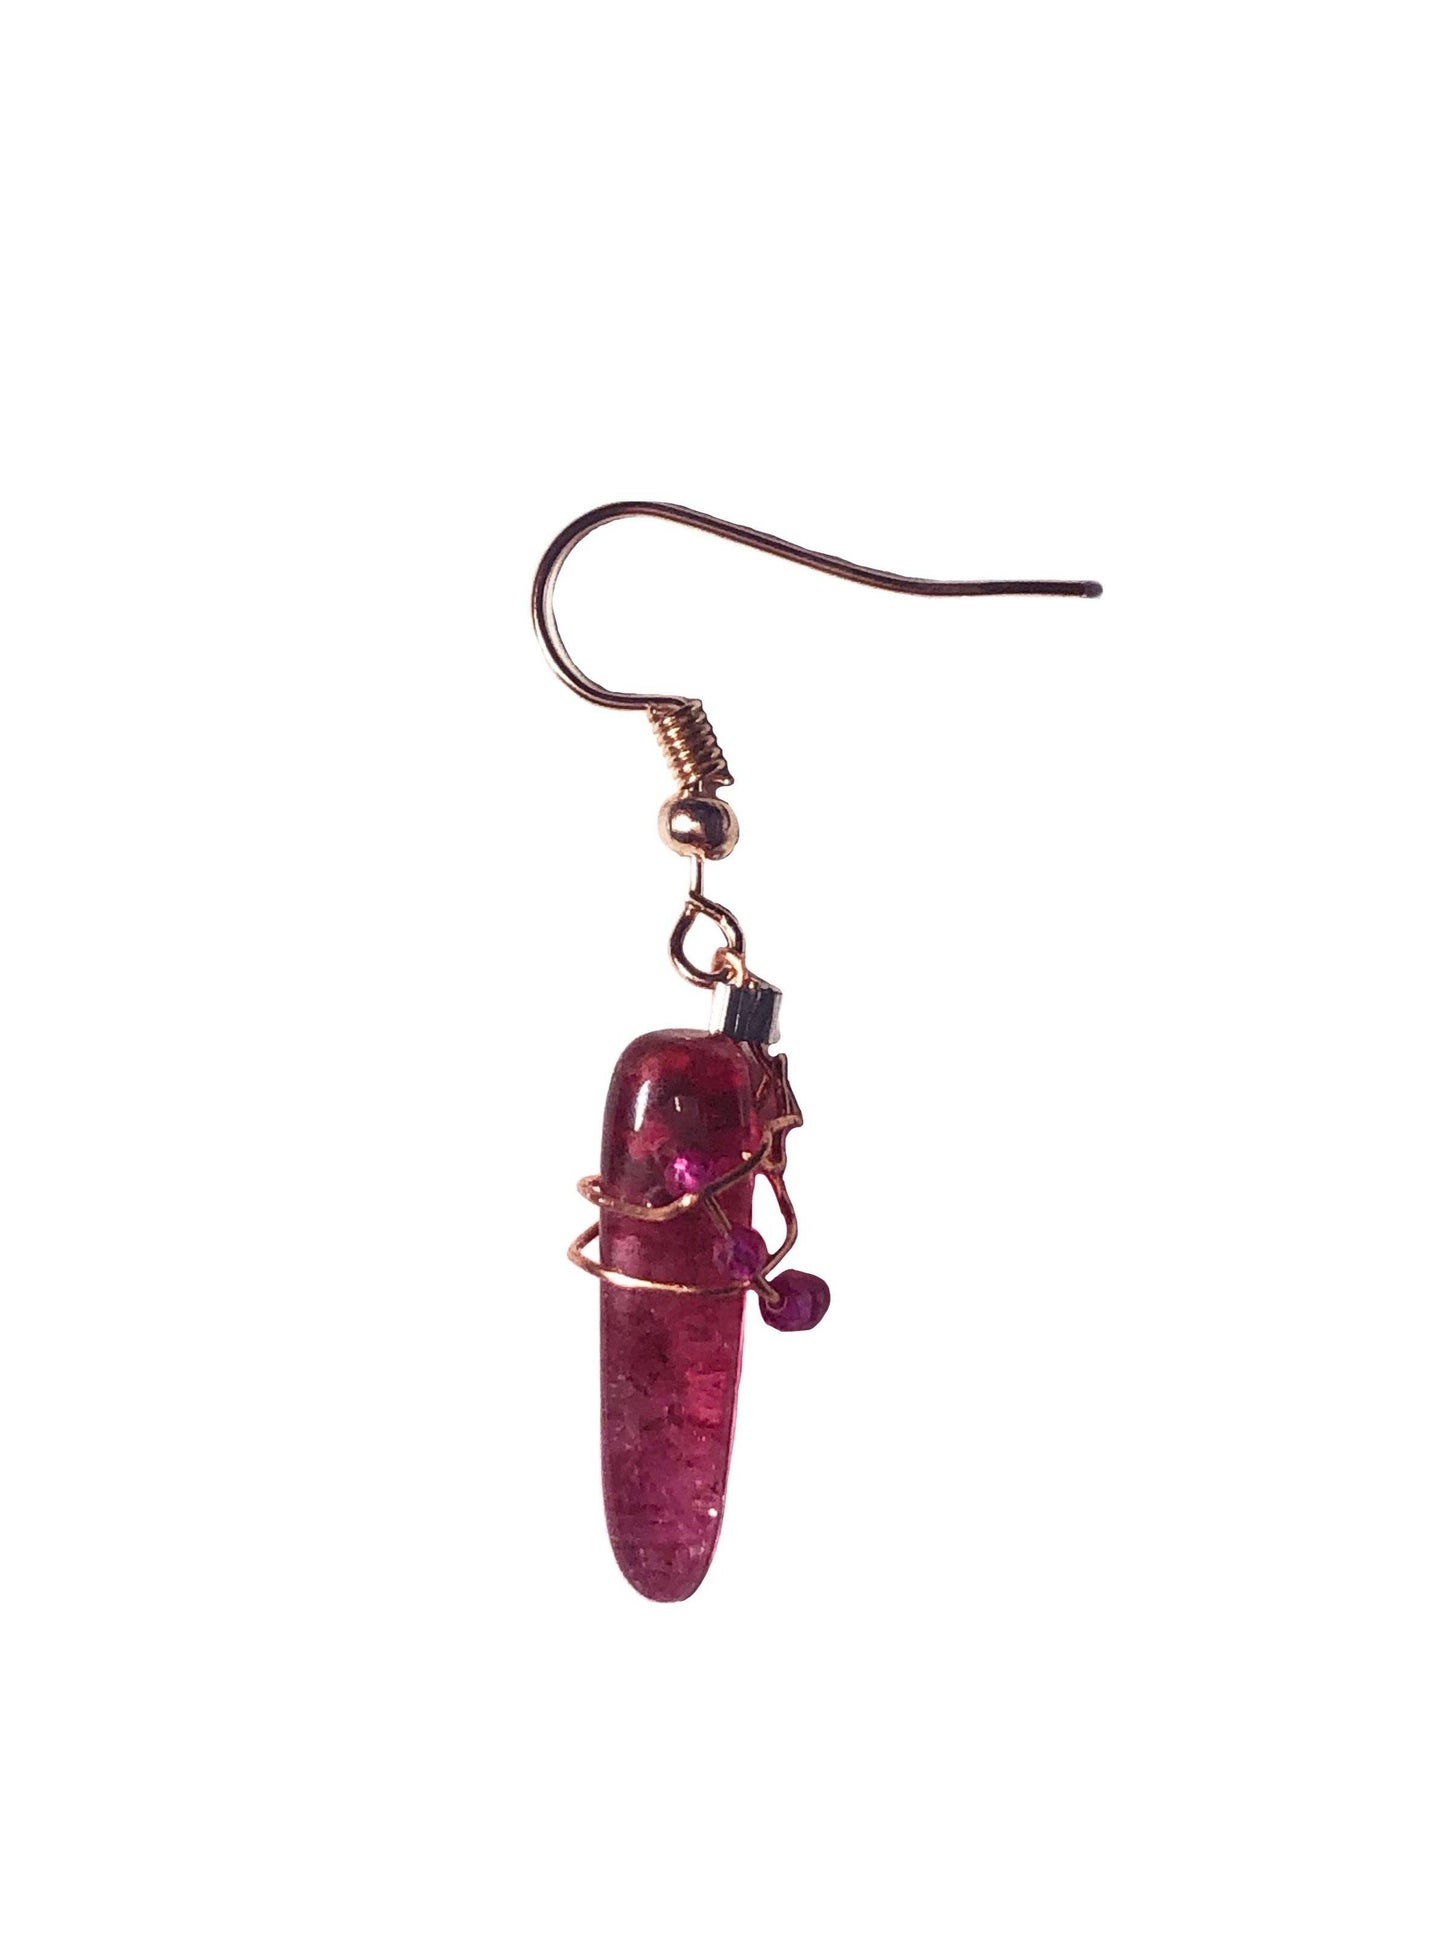 Handcrafted asymmetrical pink crystal beads and a pink tourmaline stone wire wrapped earrings. 